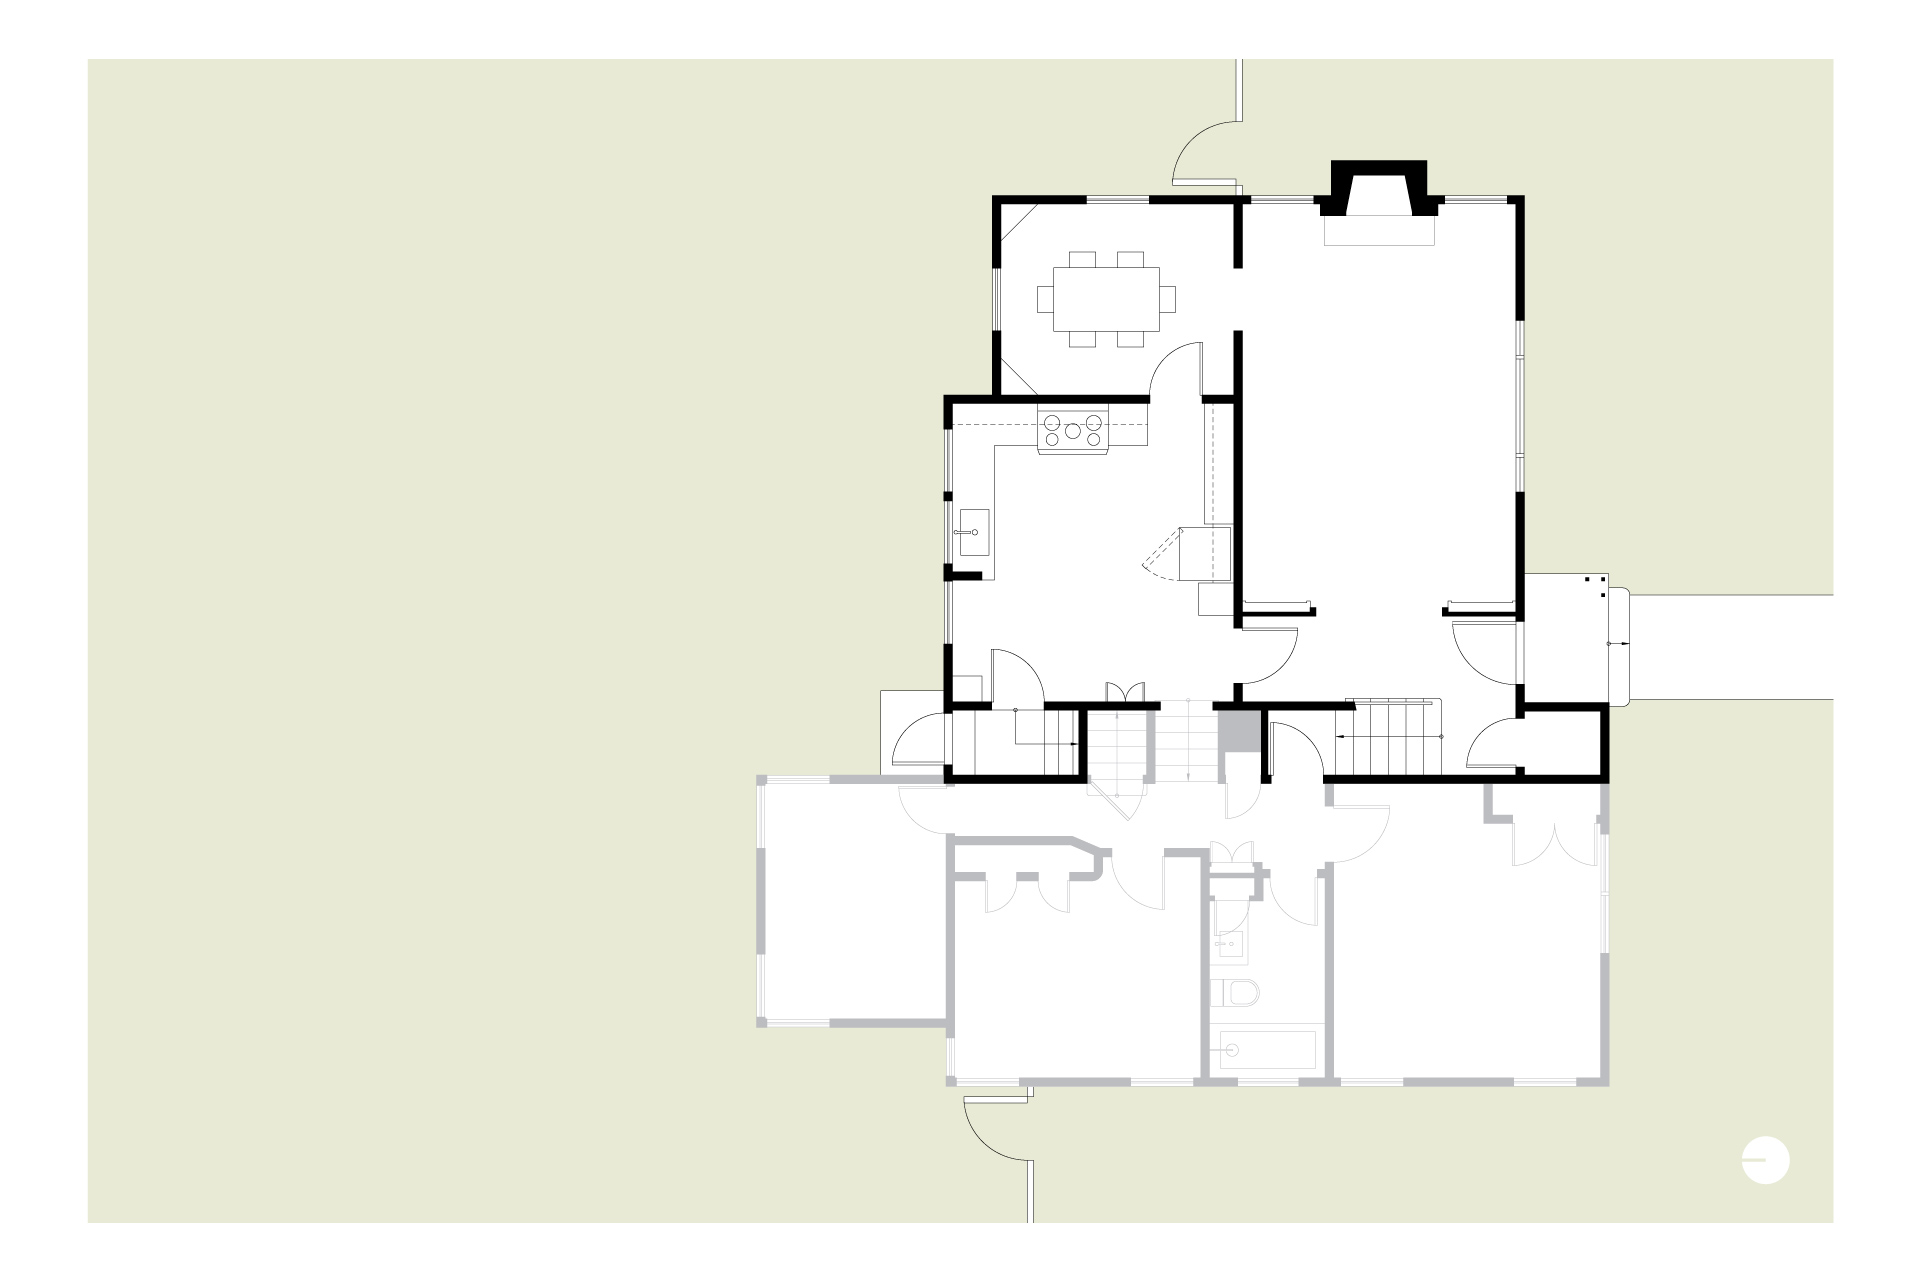 This is a drawing of the existing house prior to renovations at the Concordia Renovation.